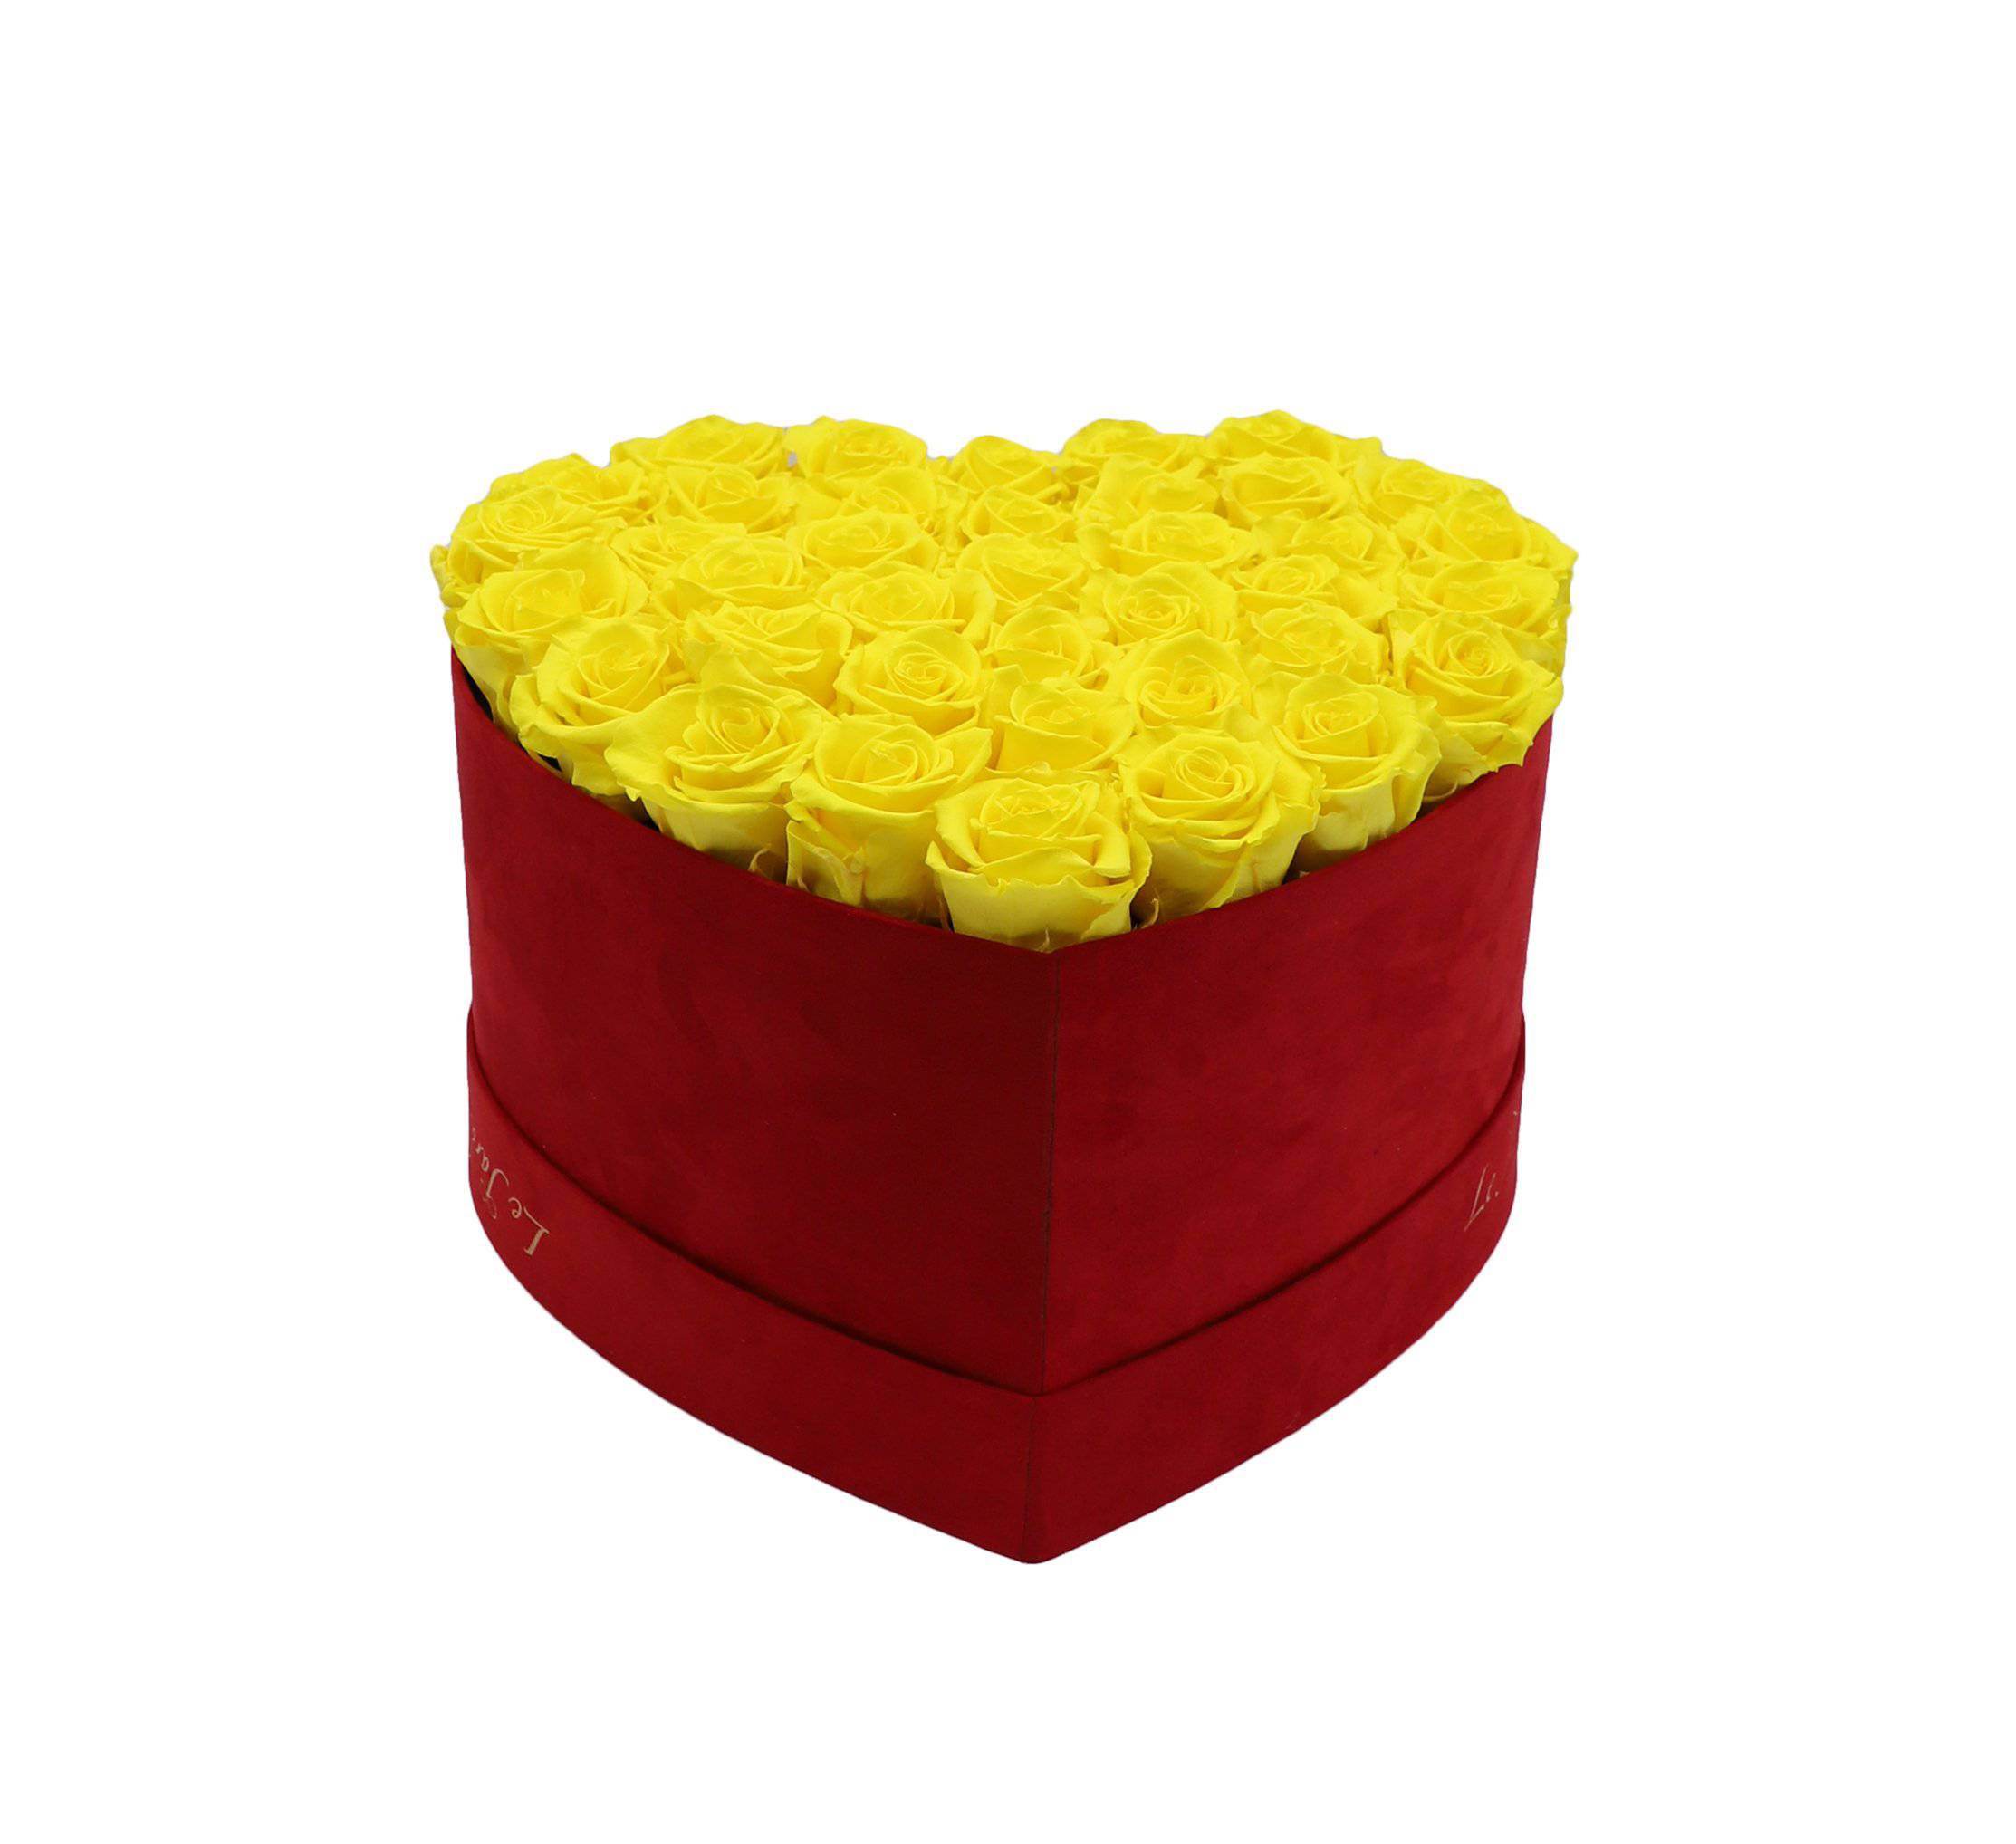 36 Yellow Preserved Roses in A Heart Shaped Box- Small Heart Luxury Red Suede Box